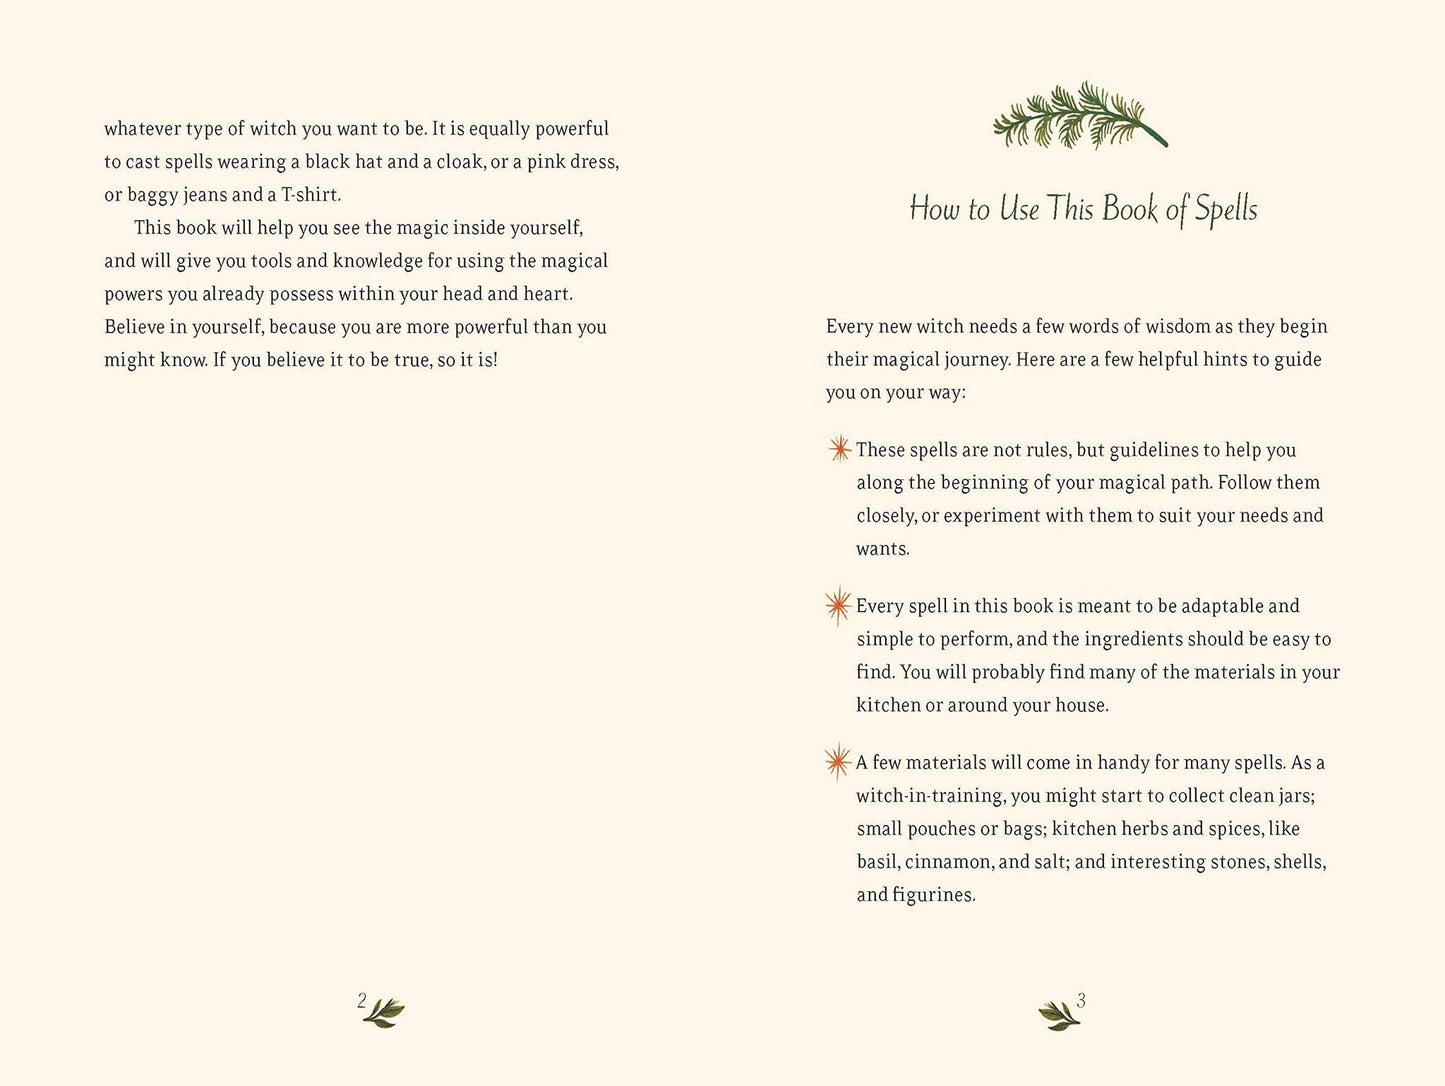 The How To page from The Little Witch's Book of Spells by Ariel Kusby.